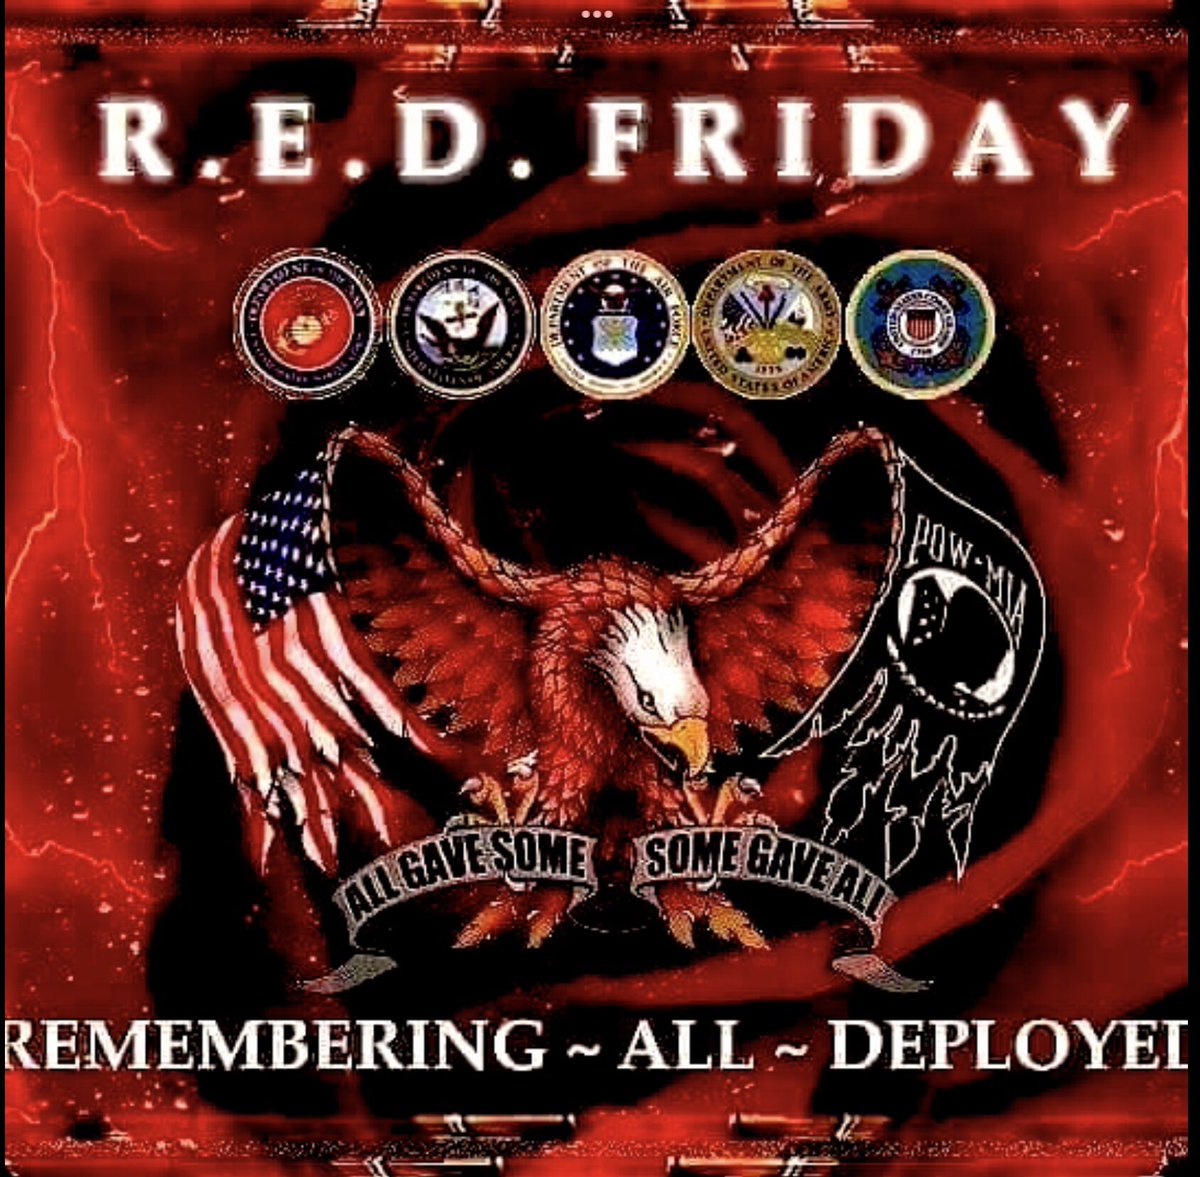 Good morning Patriots. Happy RED Friday. I pledge allegiance to the Flag of the United States of America, and to the Republic for which it stands, one Nation under God, indivisible, with liberty and justice for all. God bless our troops, God bless us all, God bless America ❤️🤍💙